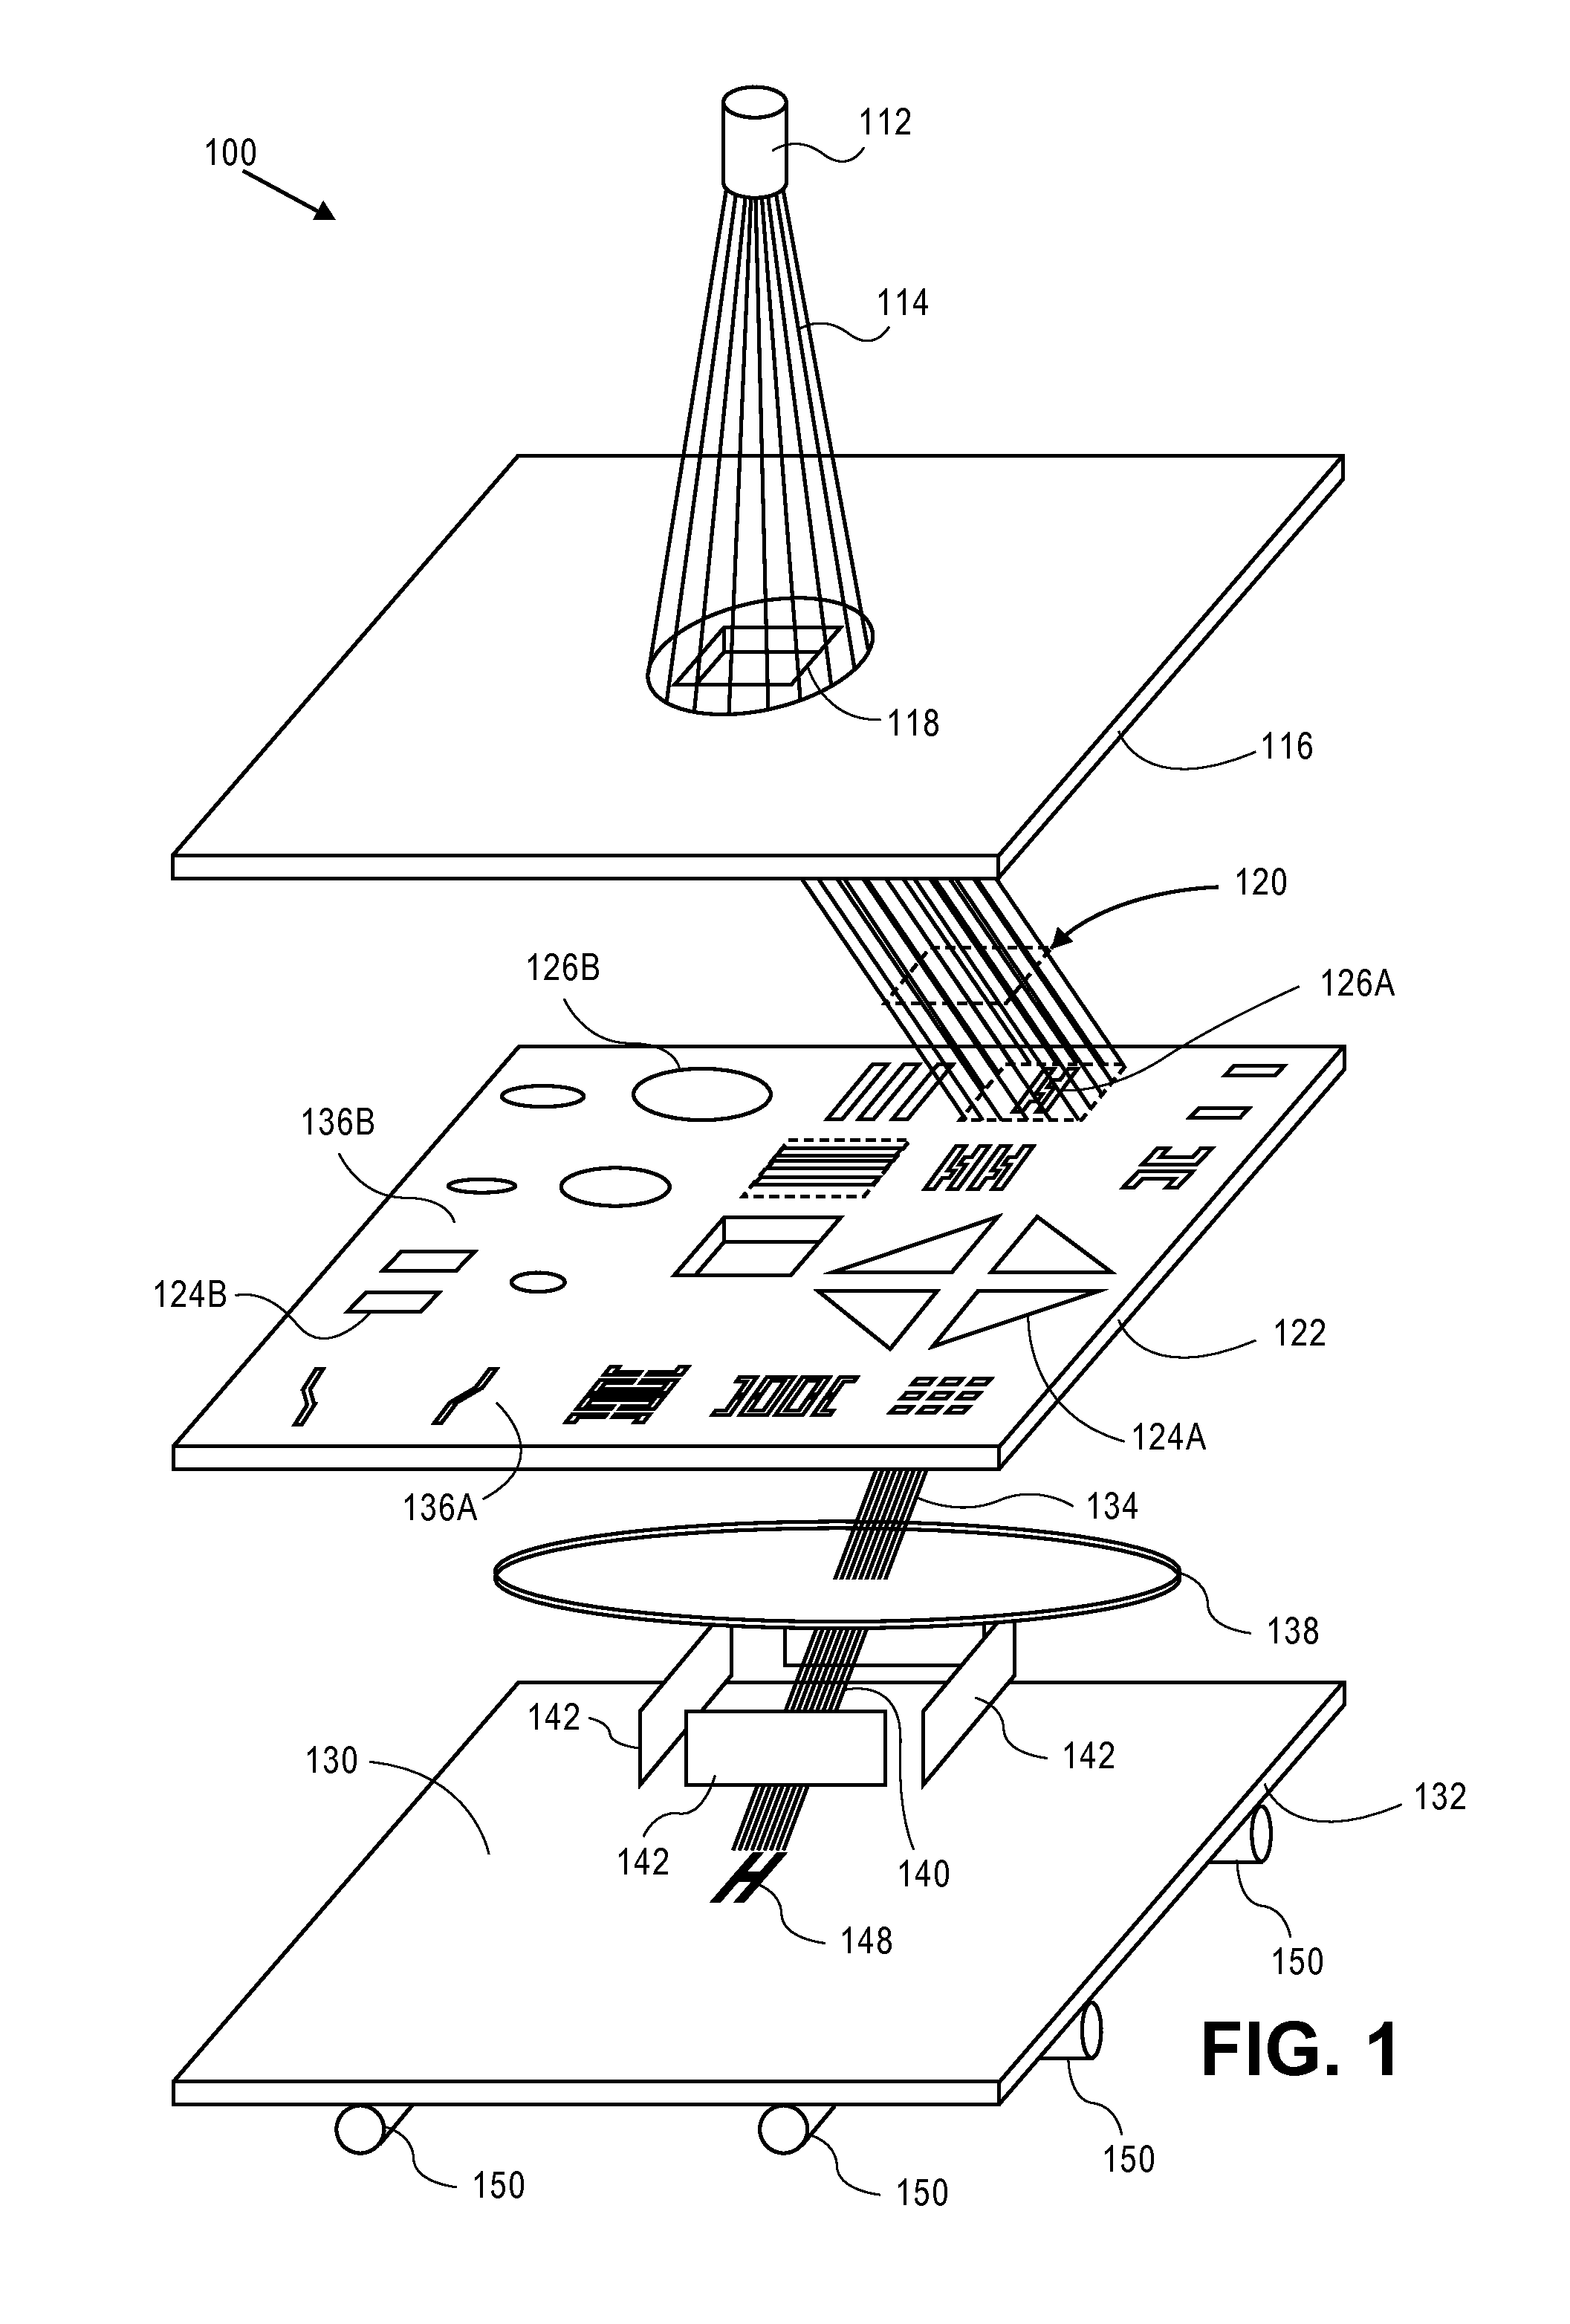 Method and system for fracturing a pattern using charged particle beam lithography with multiple exposure passes having different dosages